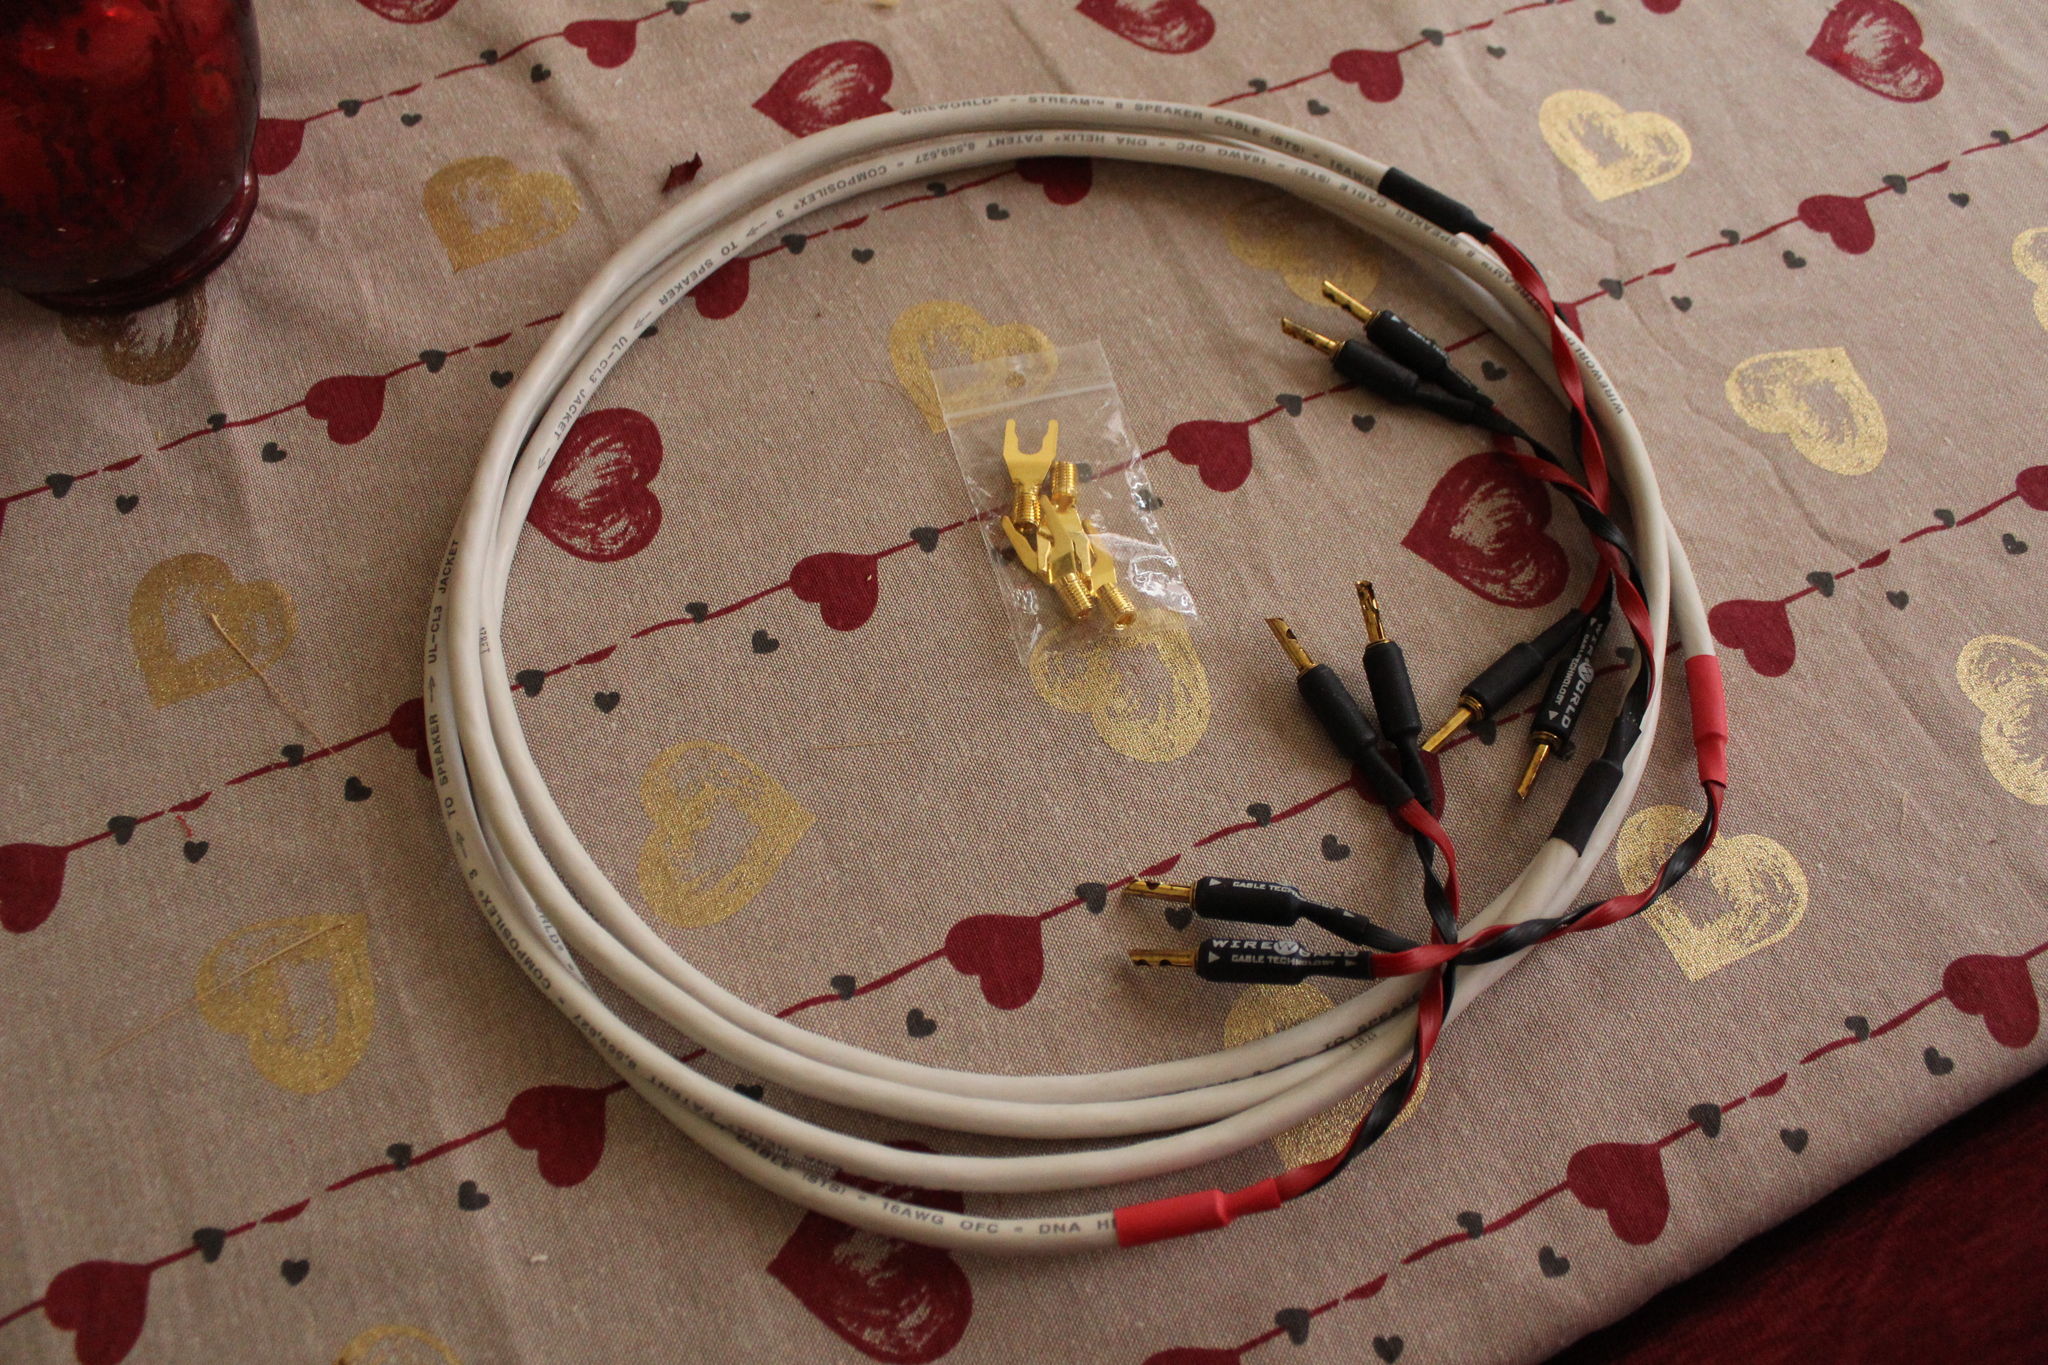 Wireworld Stream 8 Speaker Cables Pair 6.5 ft - AS NEW 2